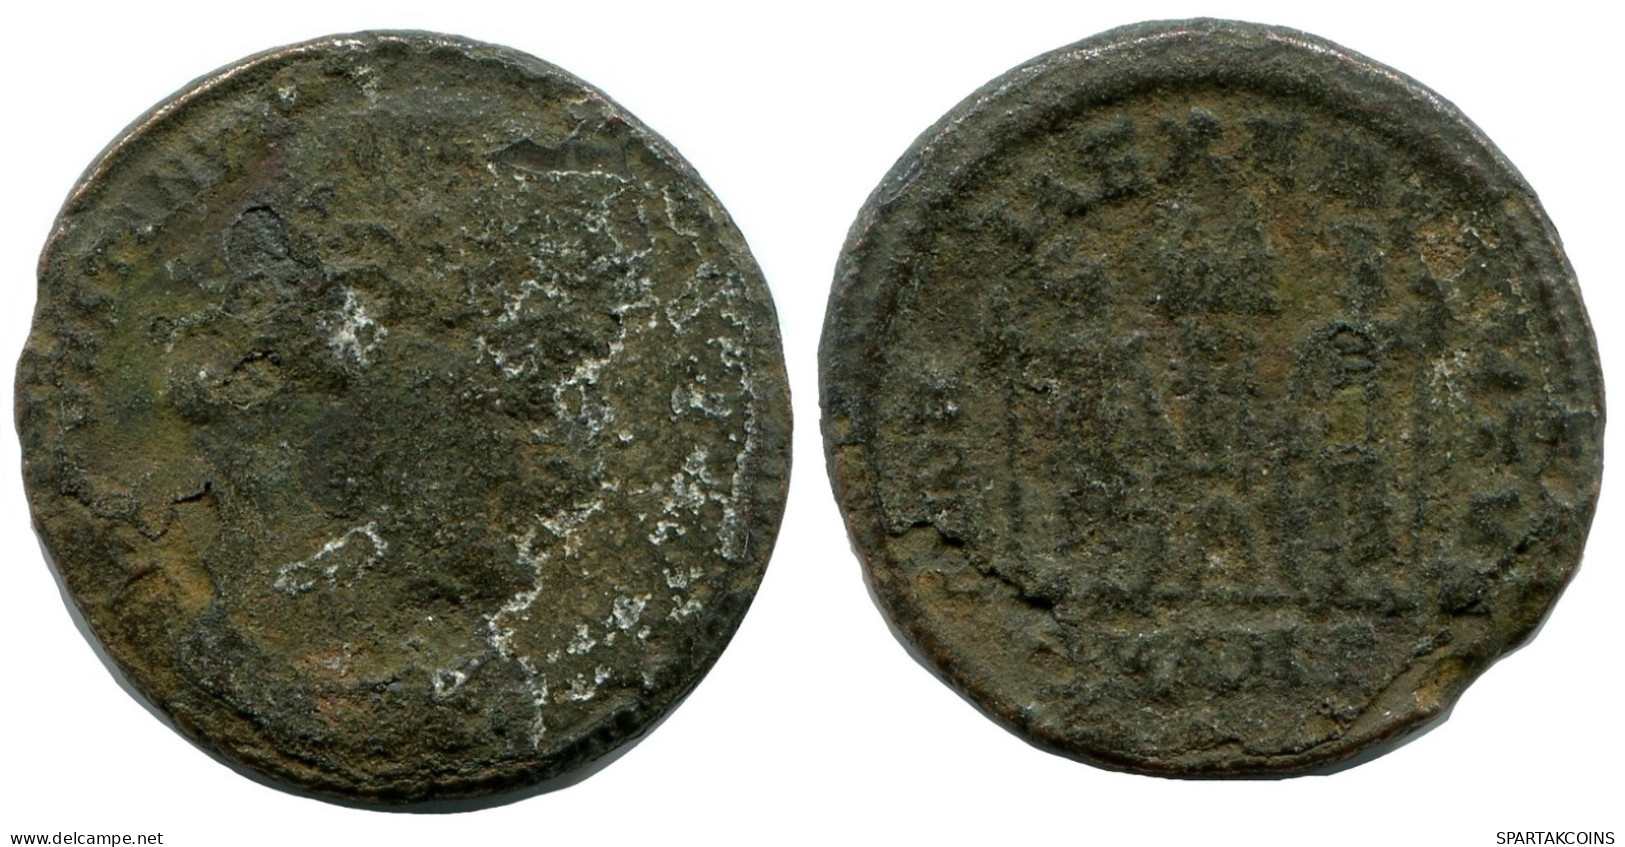 CONSTANTINE I MINTED IN ANTIOCH FROM THE ROYAL ONTARIO MUSEUM #ANC10713.14.E.A - El Imperio Christiano (307 / 363)